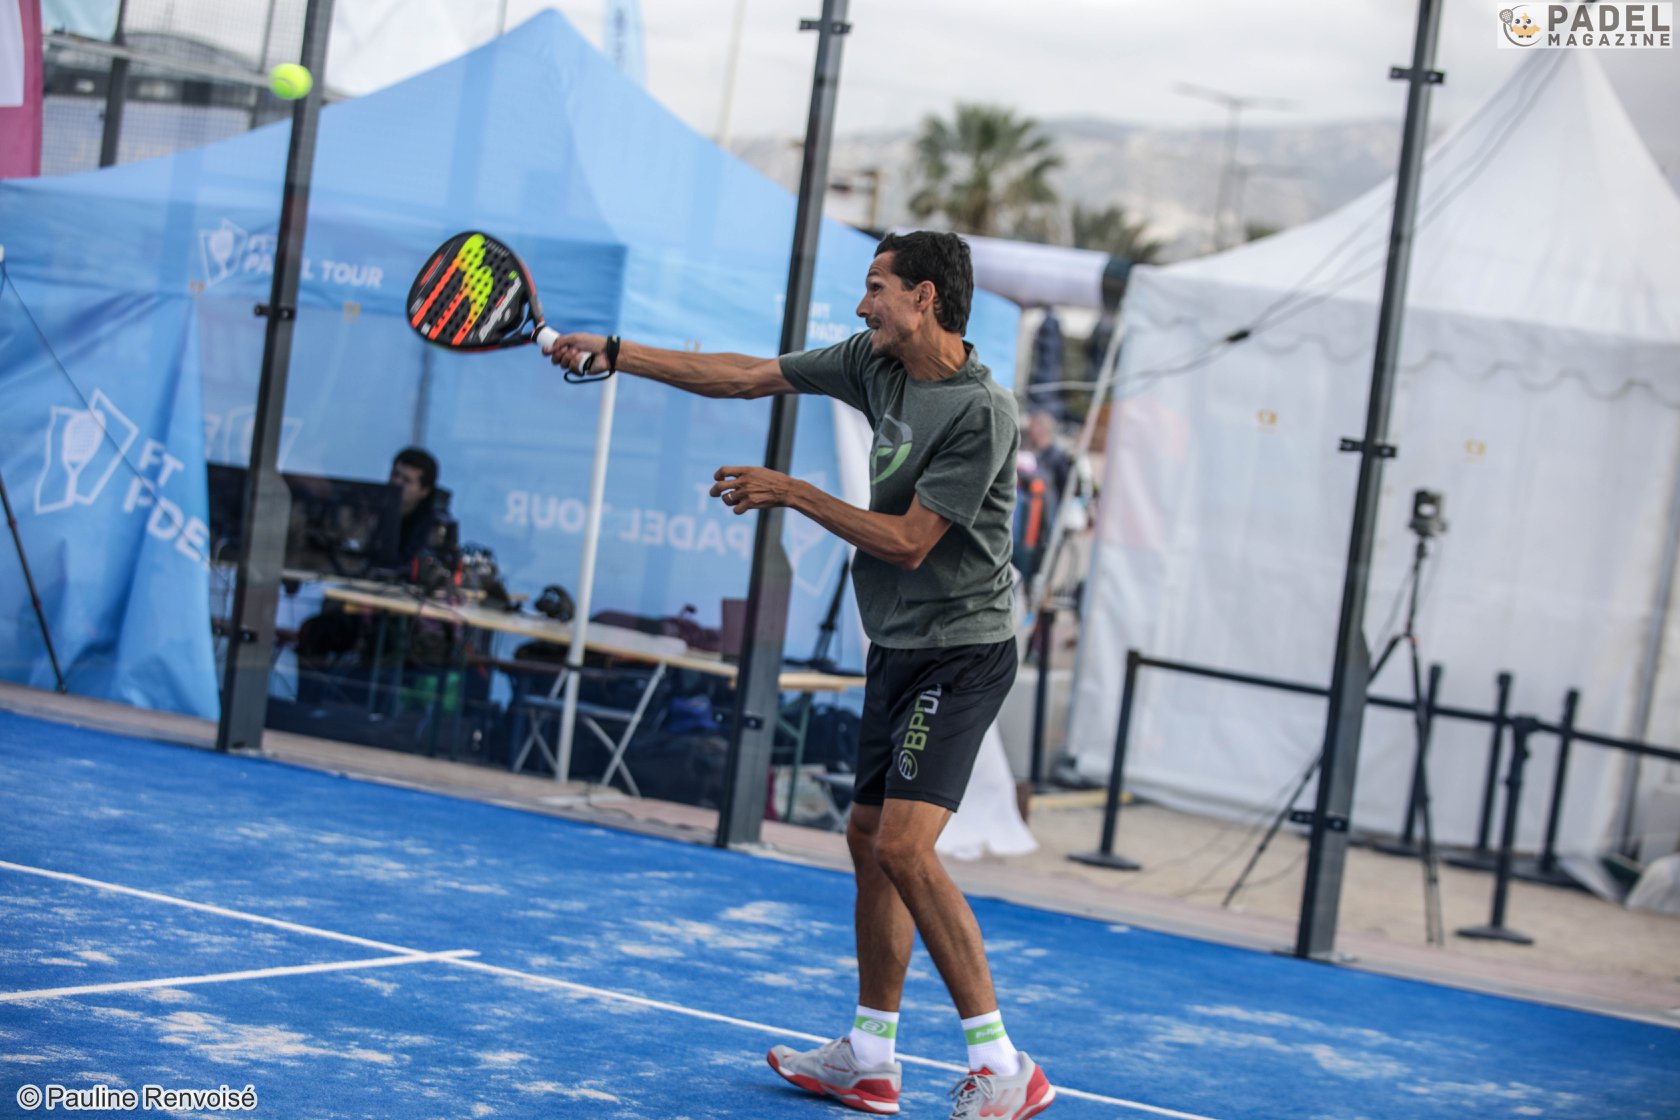 The 8 players who will represent Monaco in padel